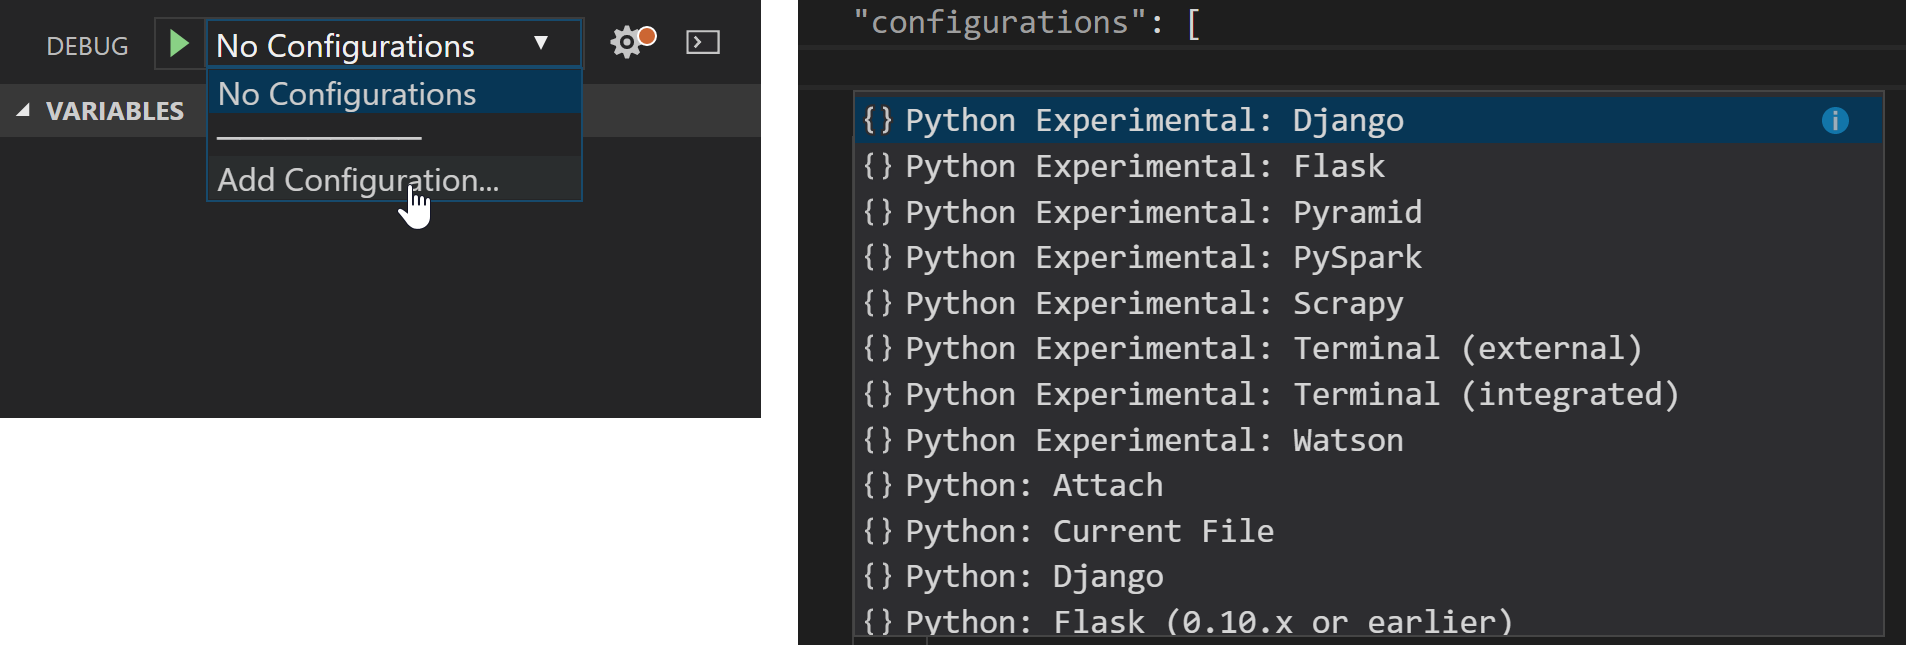 Python in Visual Studio Code - January 2019 Release 1_ExperimentalDebugConfigs.png